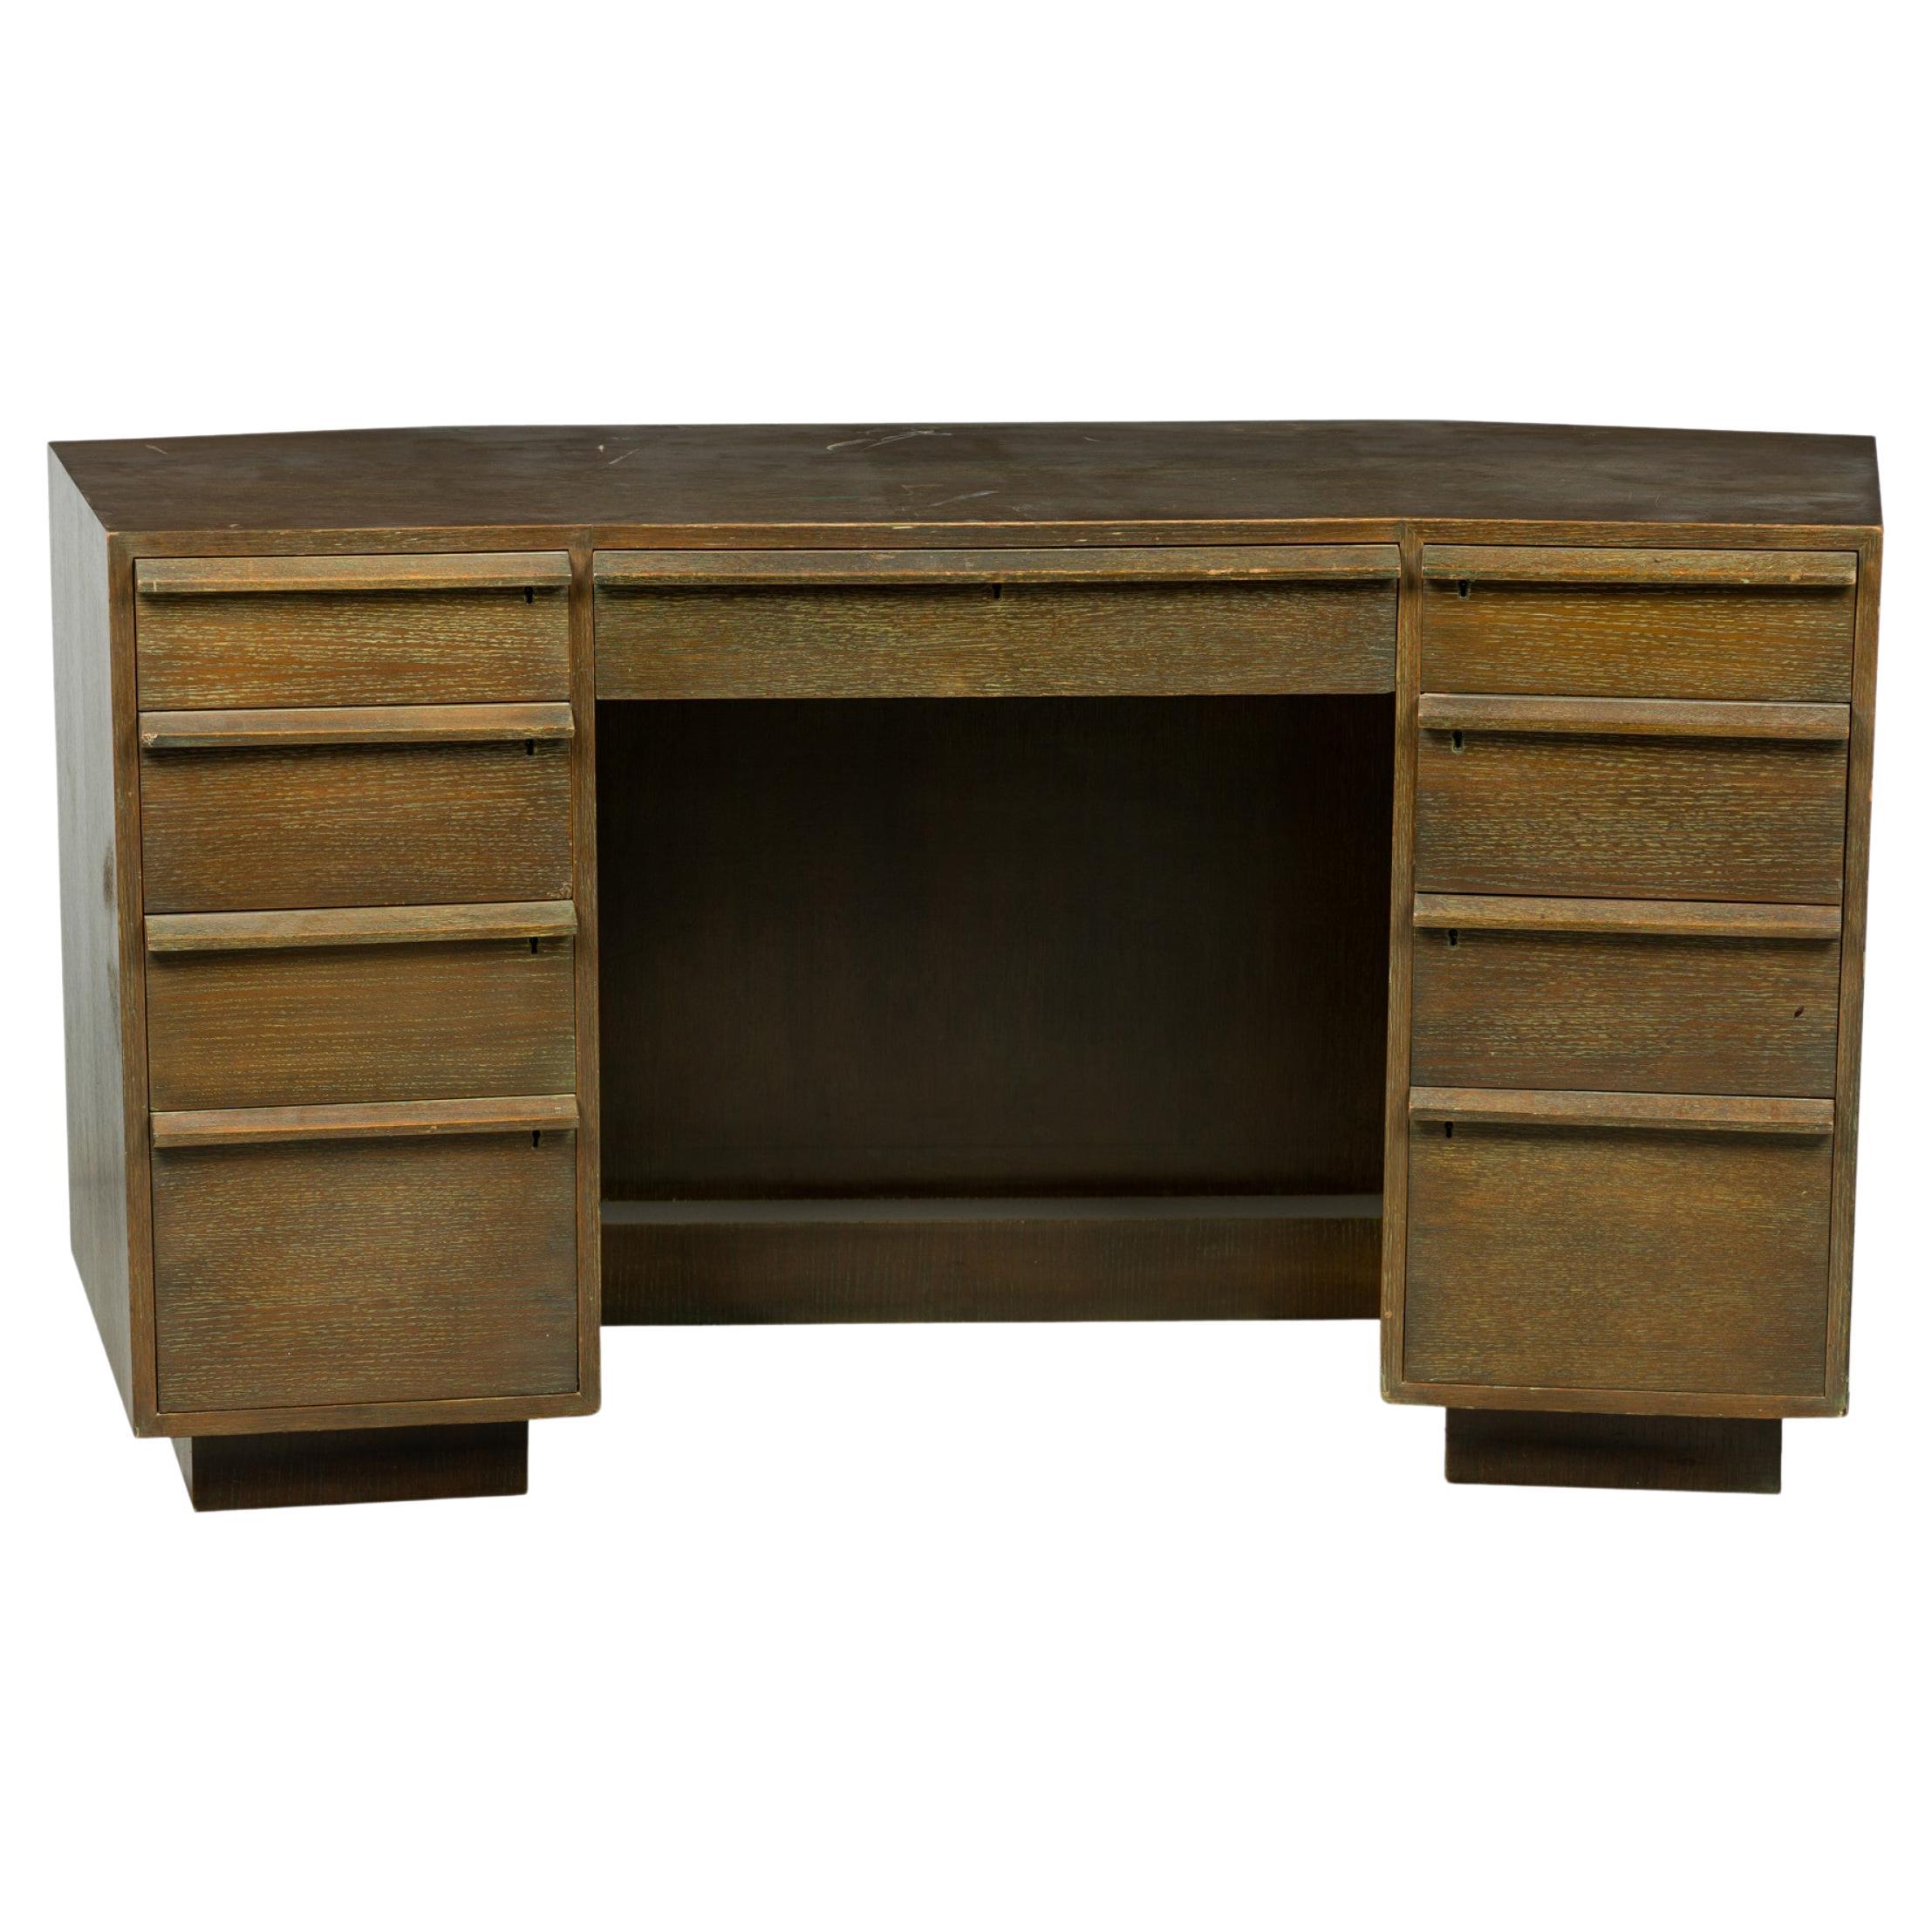 Jacques Adnet Attributed French Midcentury Cerused Oak Kneehole Desk For Sale